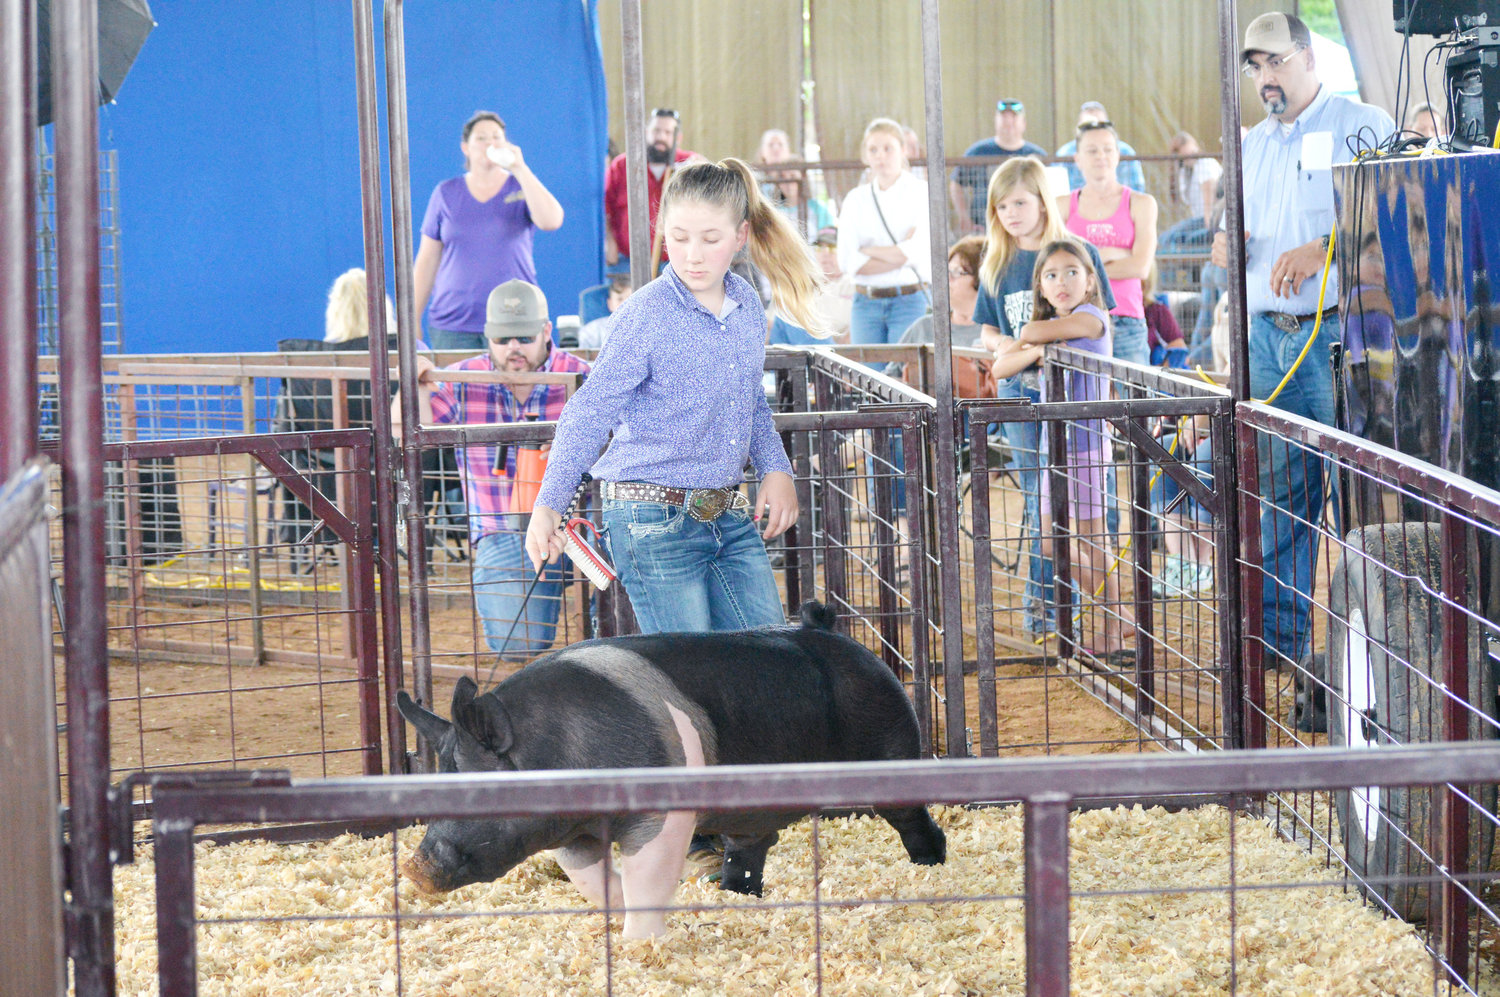 Brooke Lee took Grand Champion in the Swine division at the Wood County Junior Livestock Show. She is a member of Quitman FFA.